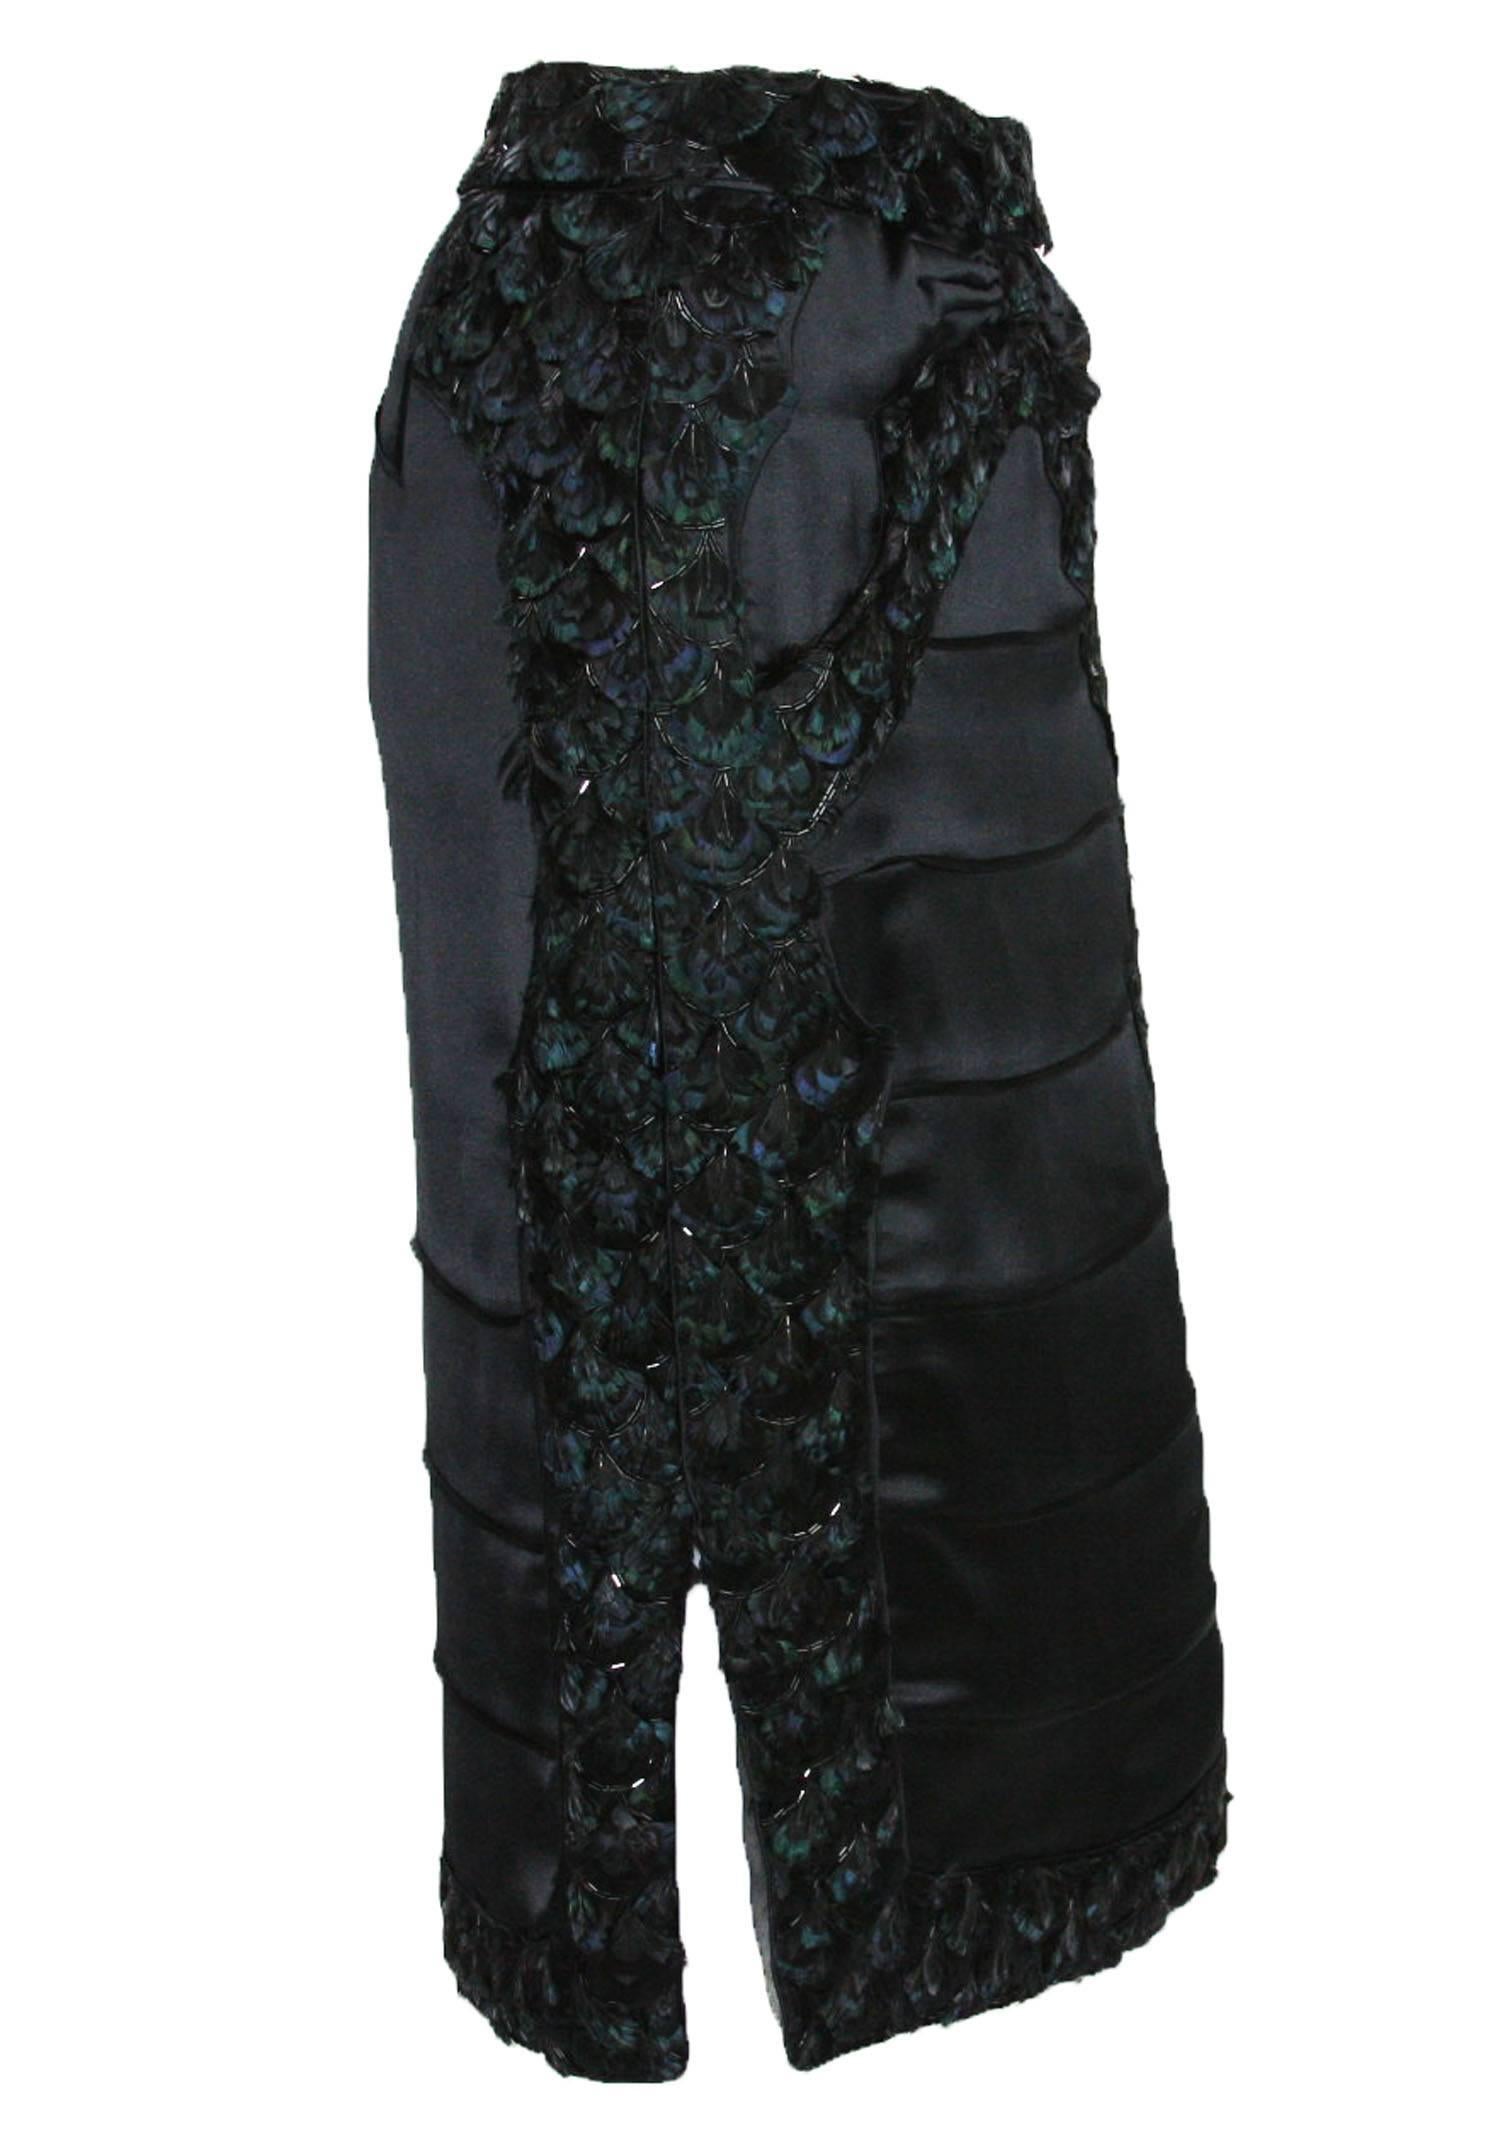 New Tom Ford for Yves Saint Laurent Embellished Silk Skirt
Fall/Winter 2004 Collection
Fr. size 38 - US 6
Color - Black
100% Silk
Embellished with Black Beads & Feathers
Fully Lined
Zip Closure at Side
Made in France
New with tag.
